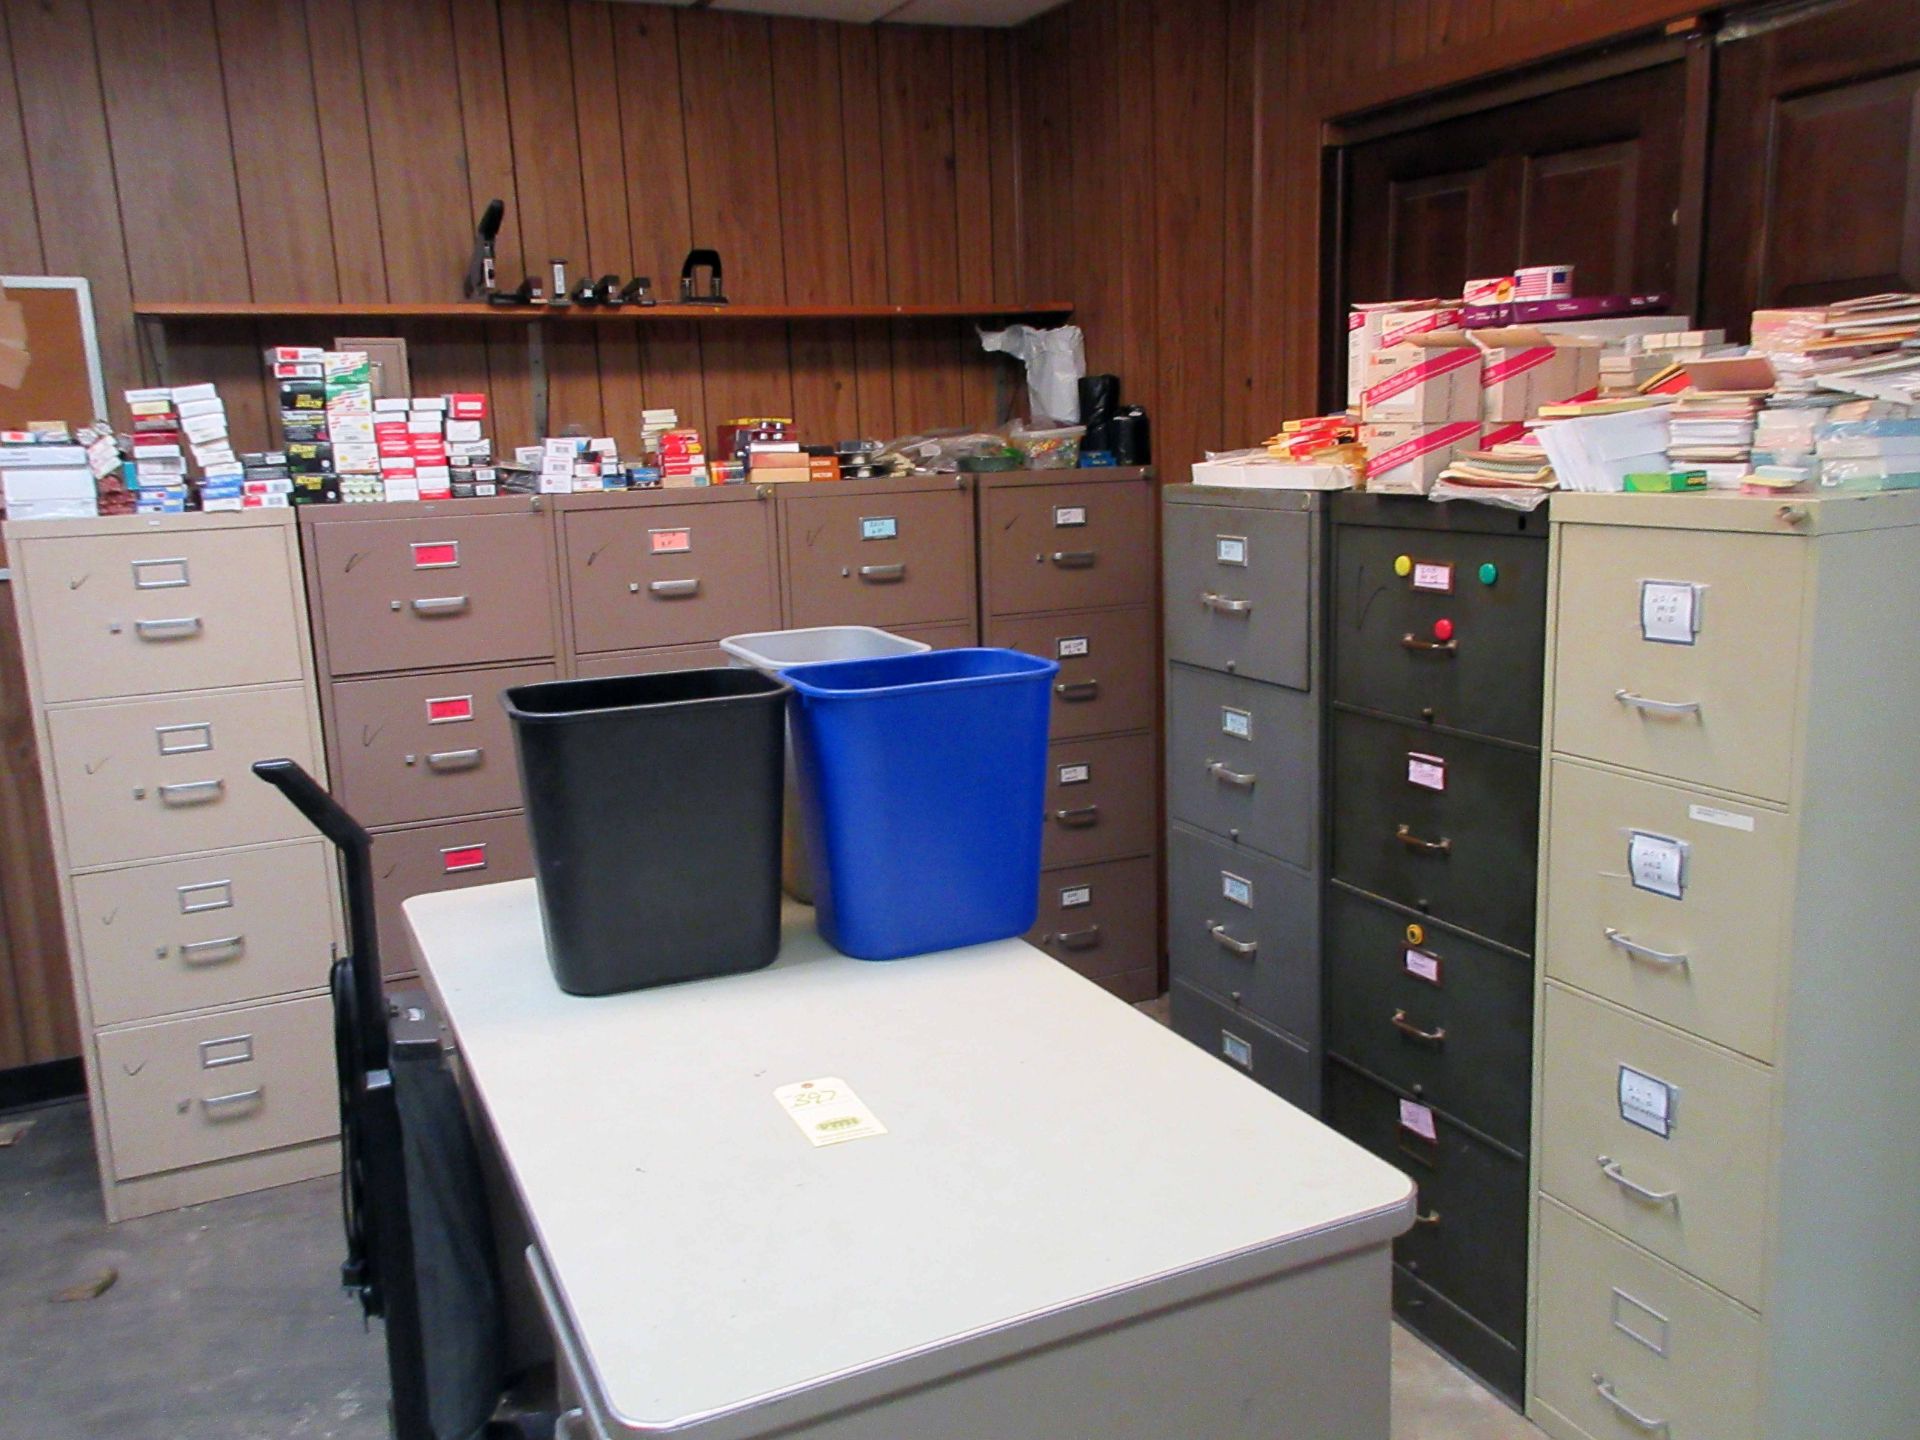 LOT CONSISTING OF: office furniture & supplies (mini fridge not included)